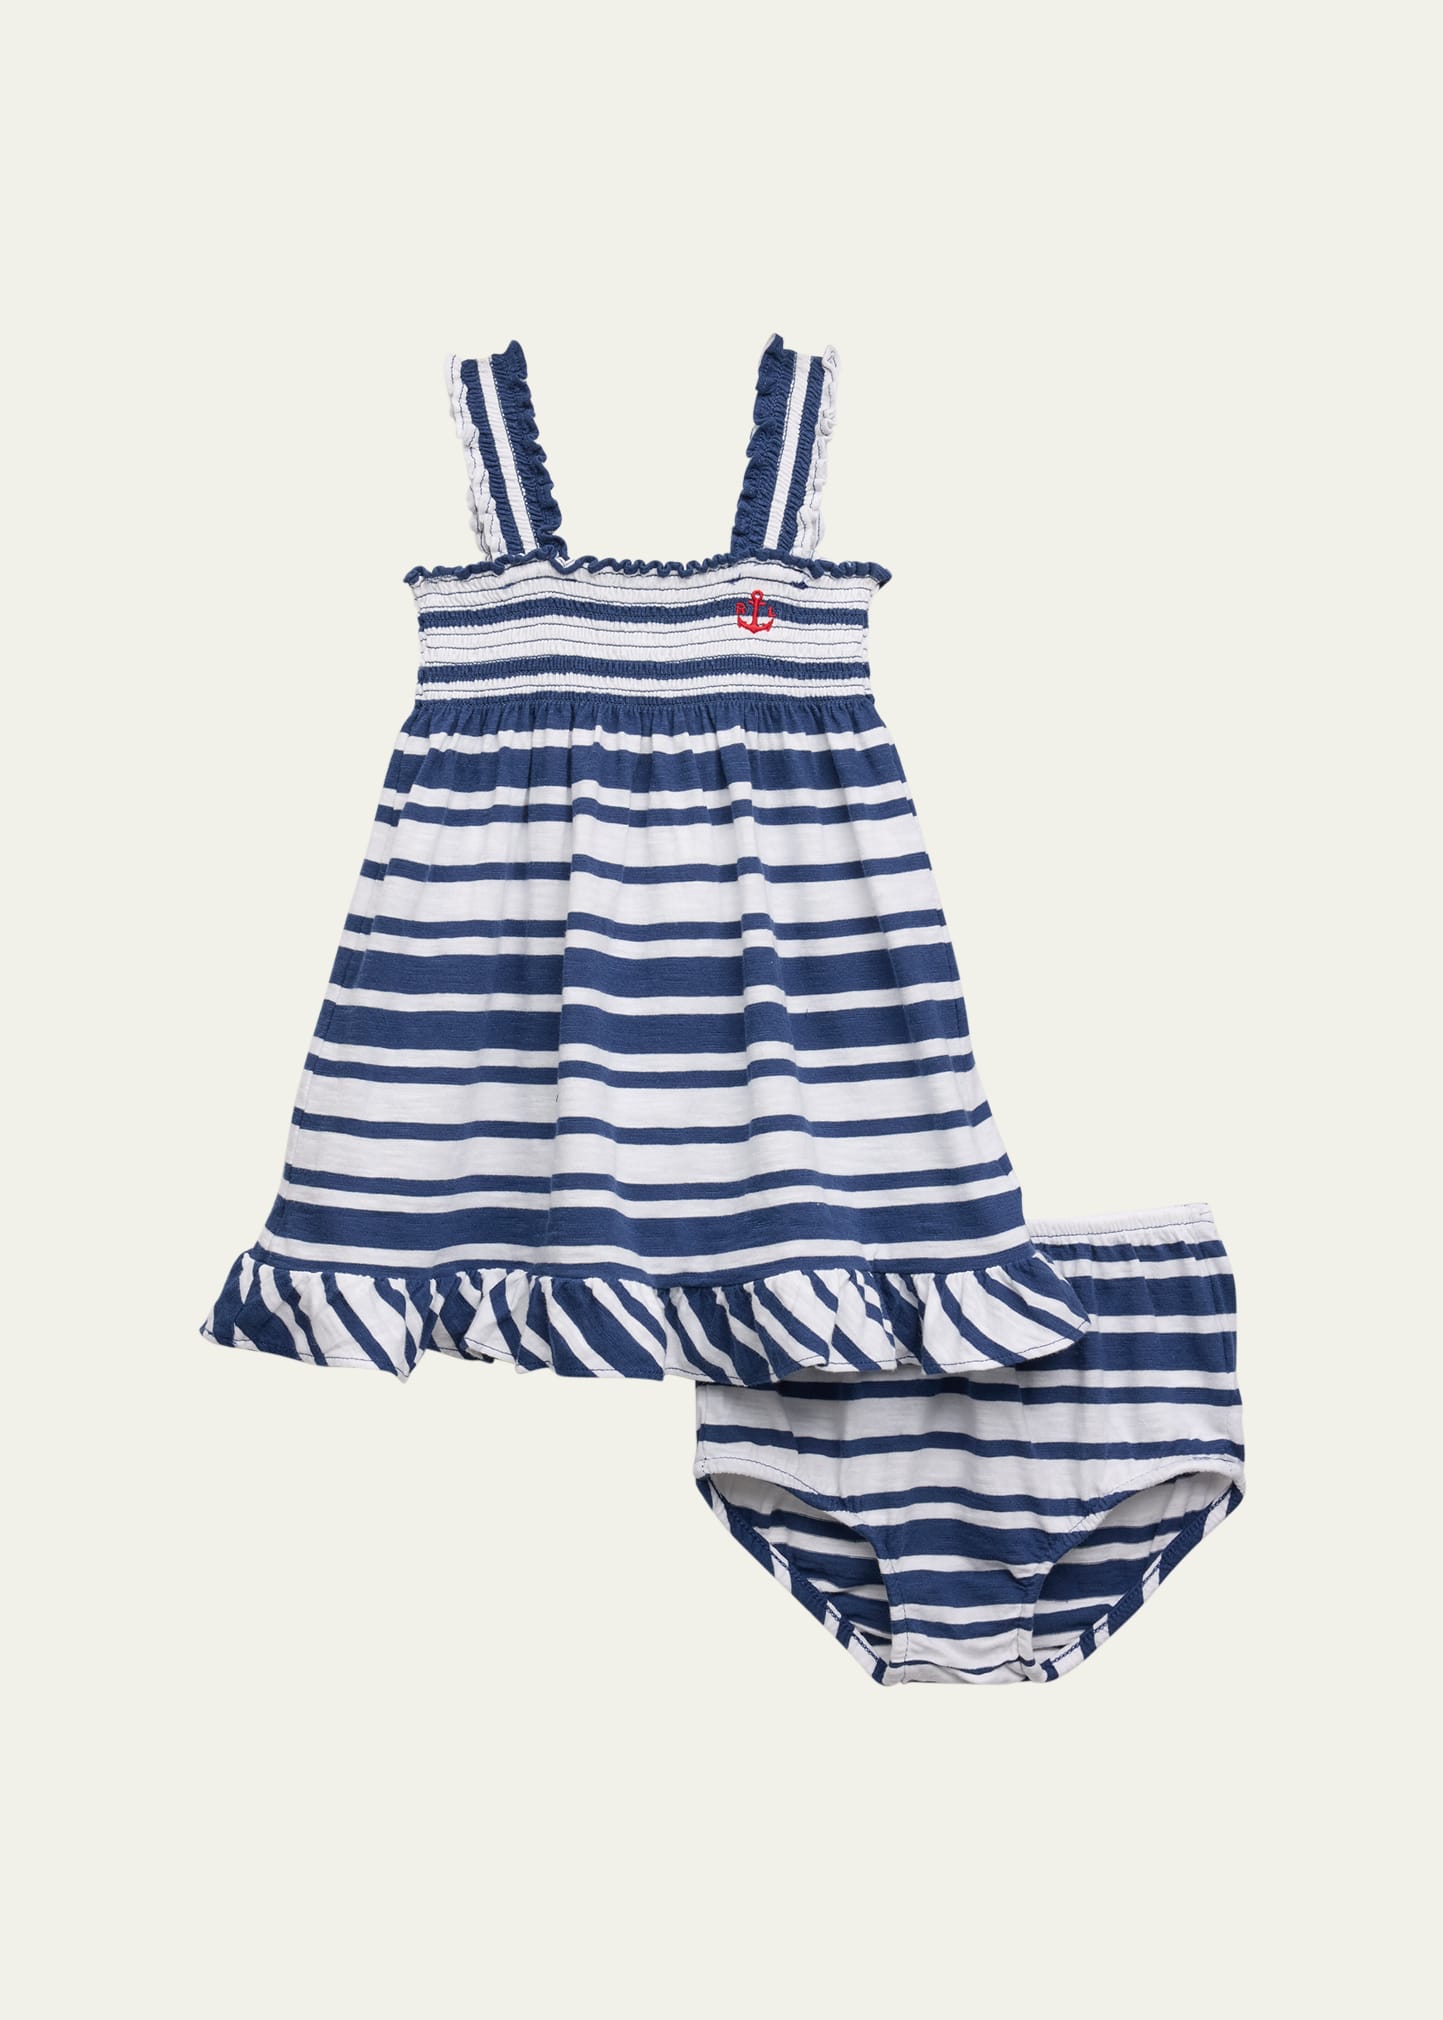 Girl's Nautical-Inspired Smocked Dress W/ Bloomers, Size 6M-24M